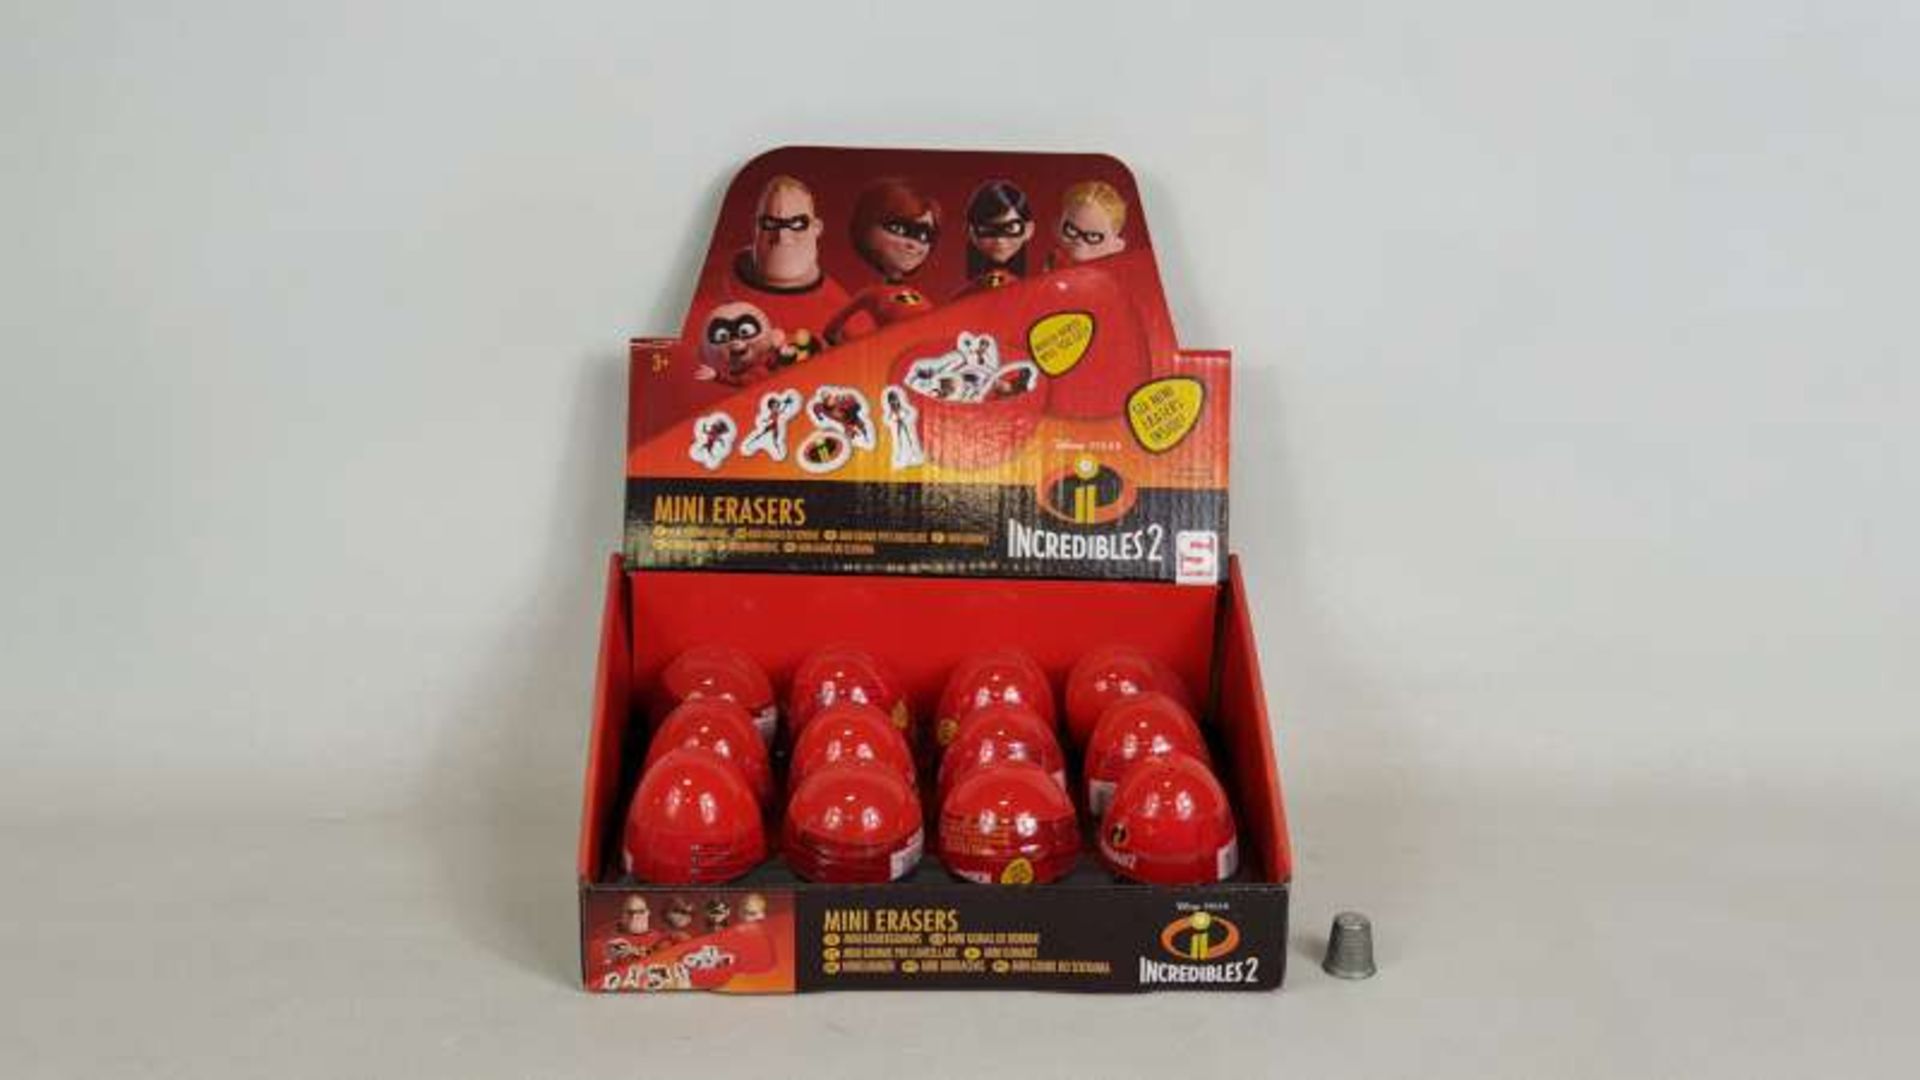 96 X BRAND NEW INCREDIBLES SECRET EGG FLAT ERASERS IN DISPLAY CASE IN 2 BOXES